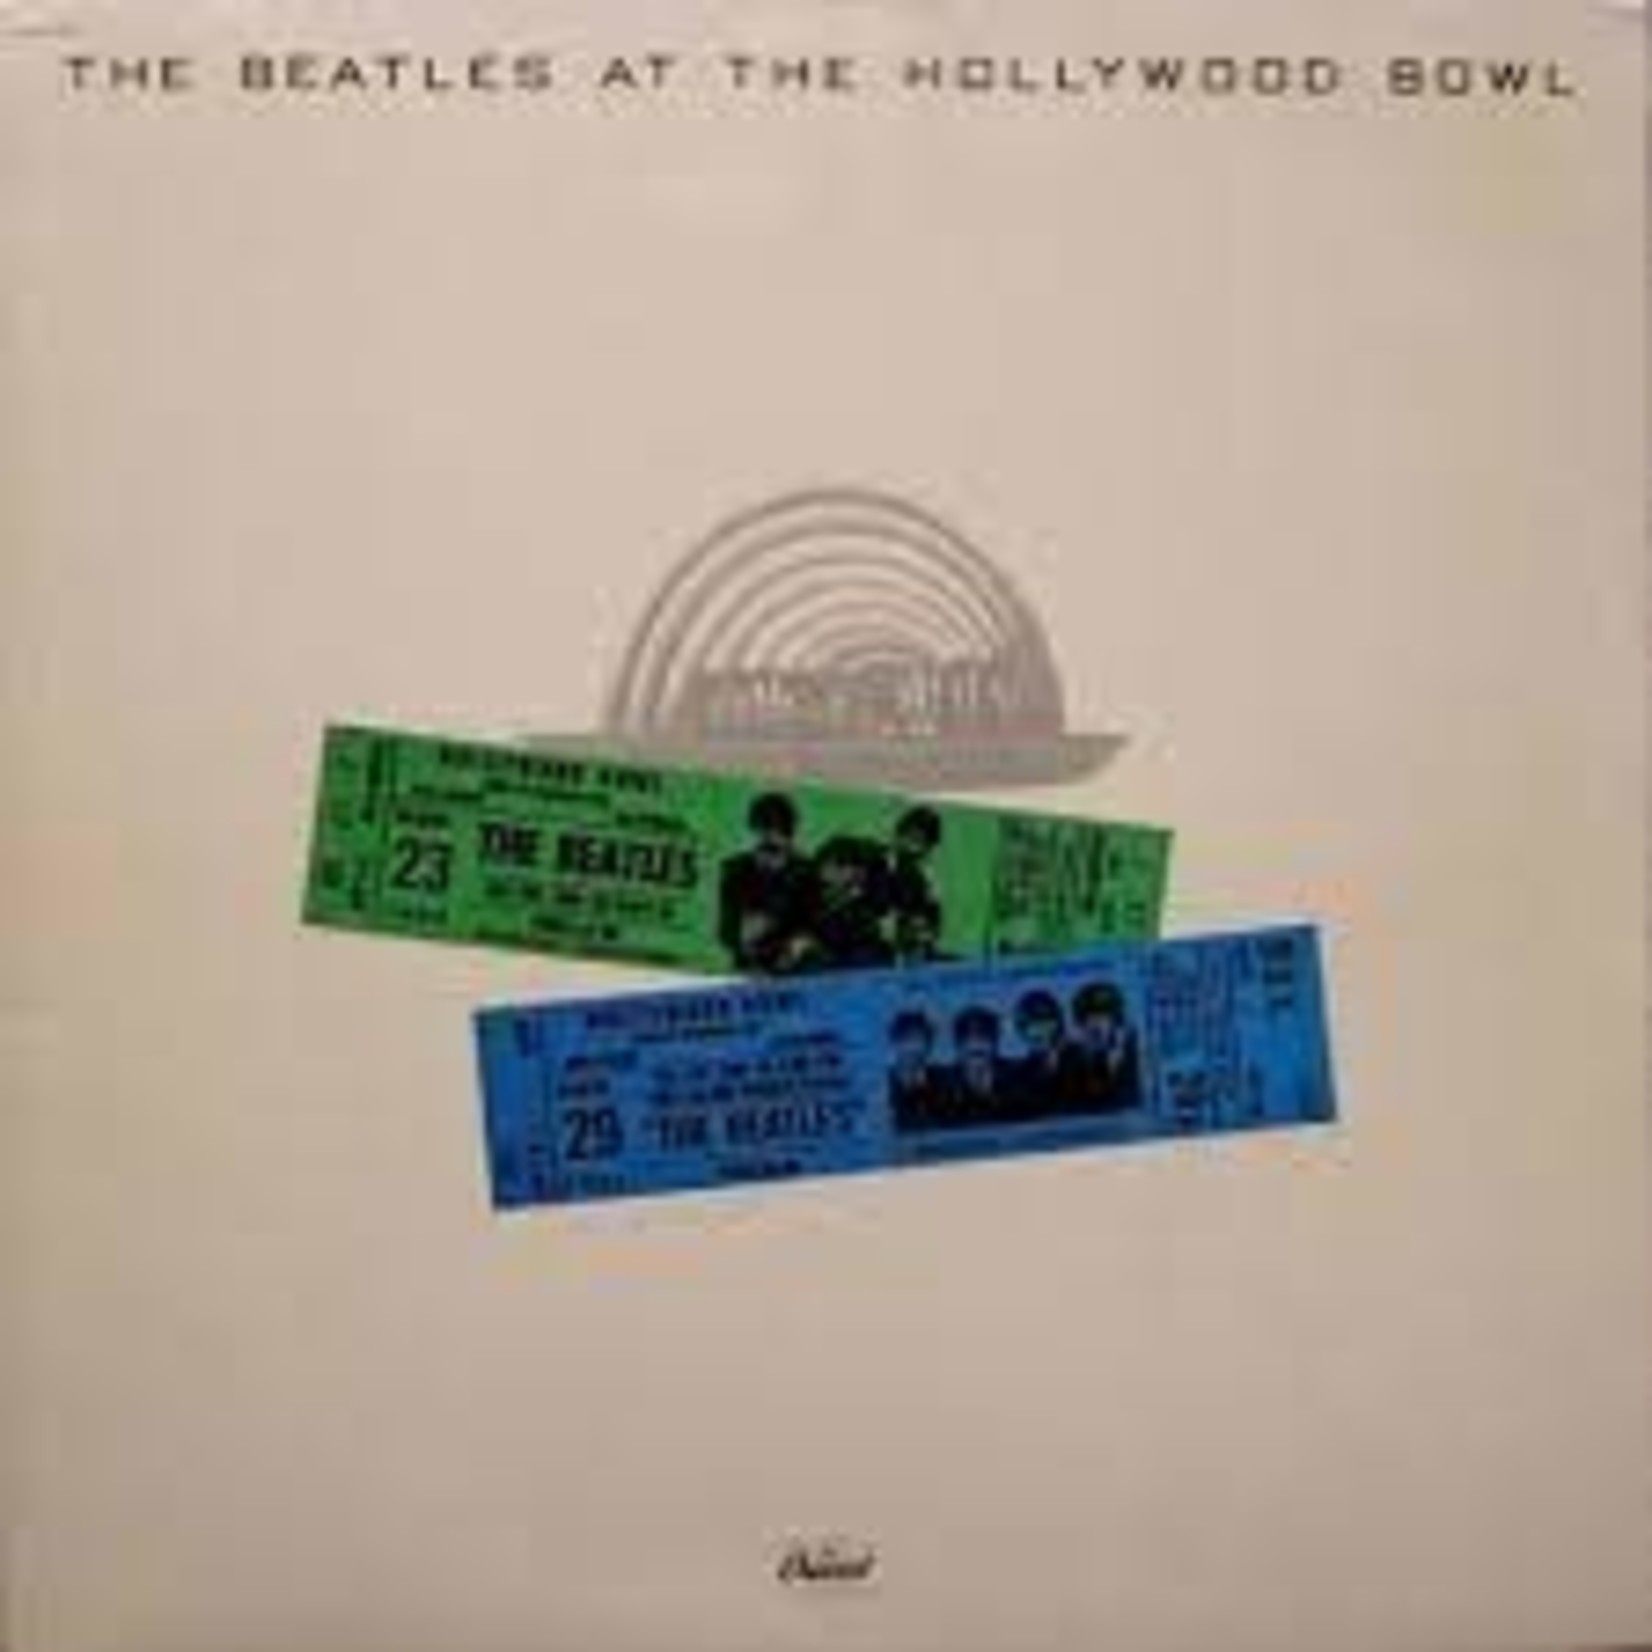 THE BEATLES - at the Hollywood bowl LP (second hand)